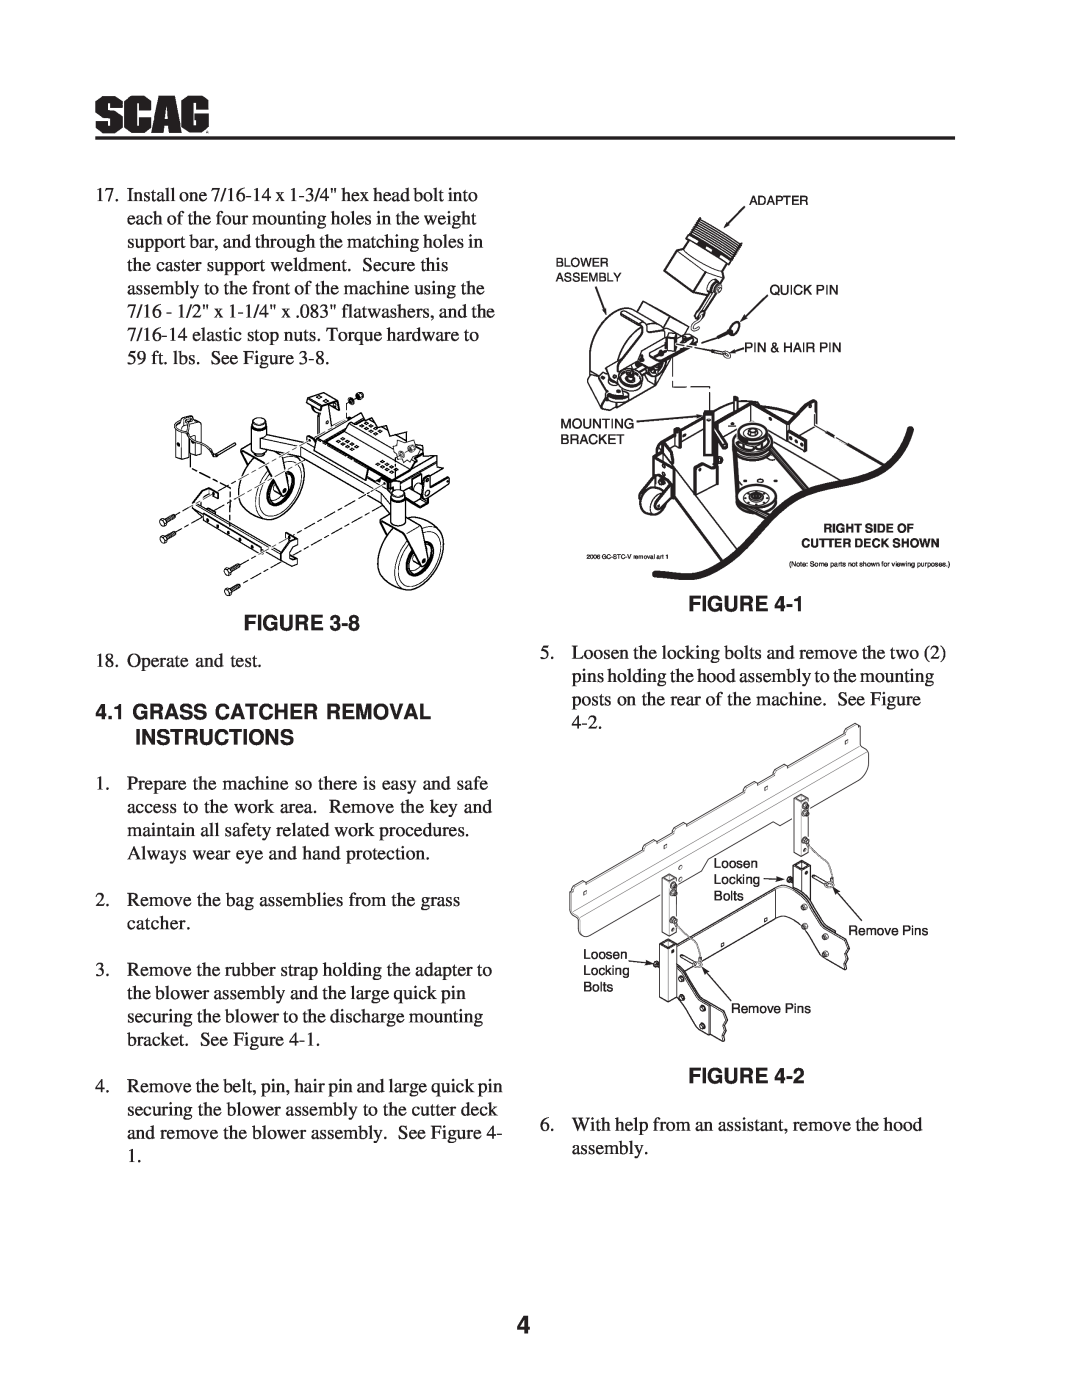 Scag Power Equipment GC-STWC-61V operating instructions Grass Catcher Removal Instructions 